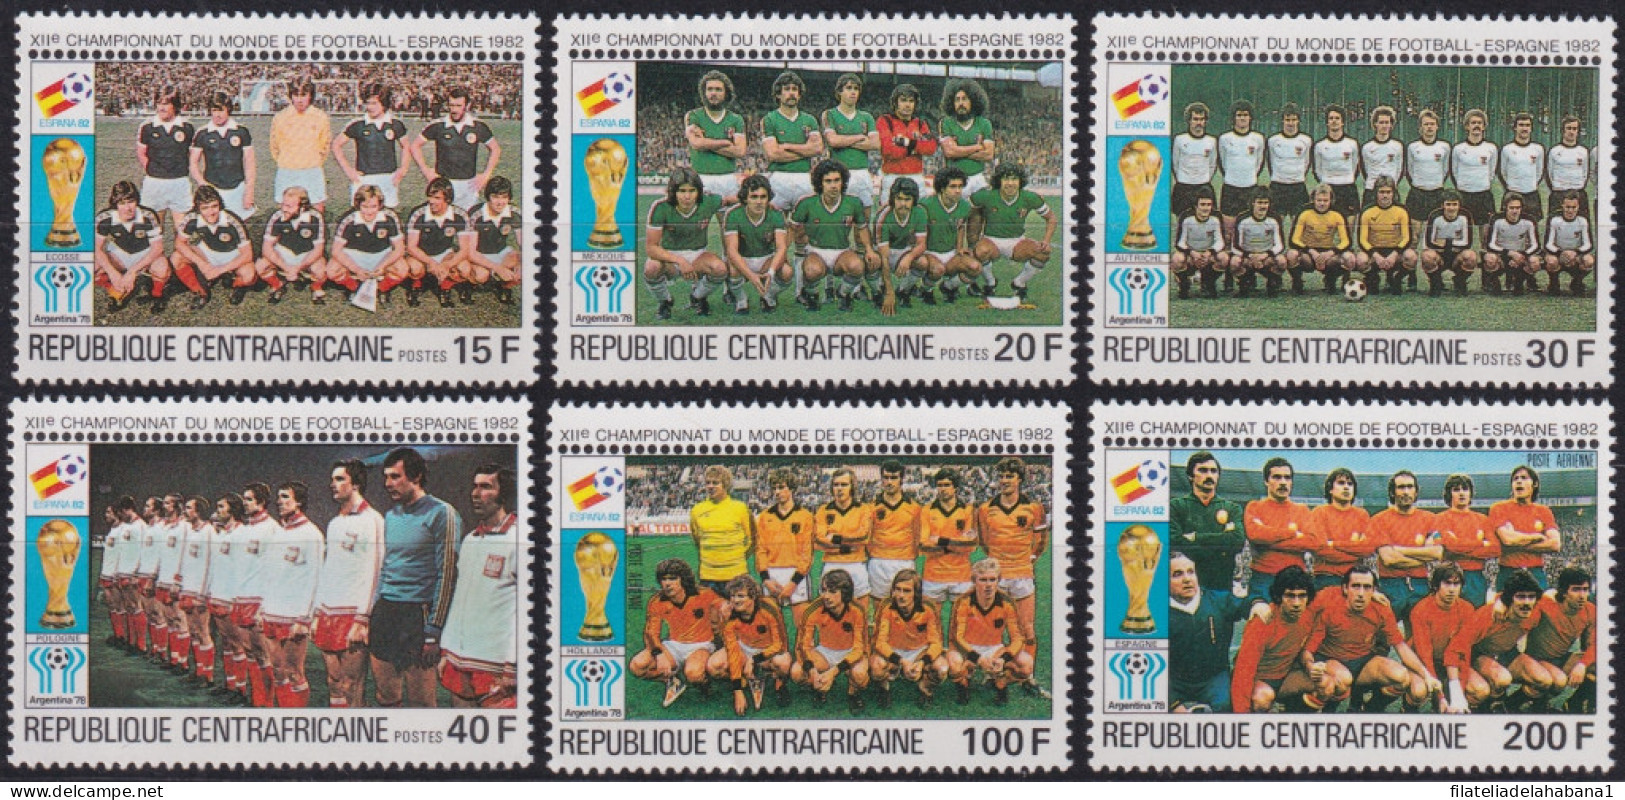 F-EX48966 CENTRAL AFRICA MNH 1982 WORLD CHAMPIONSHIP SOCCER FOOTBALL.  - 1982 – Spain